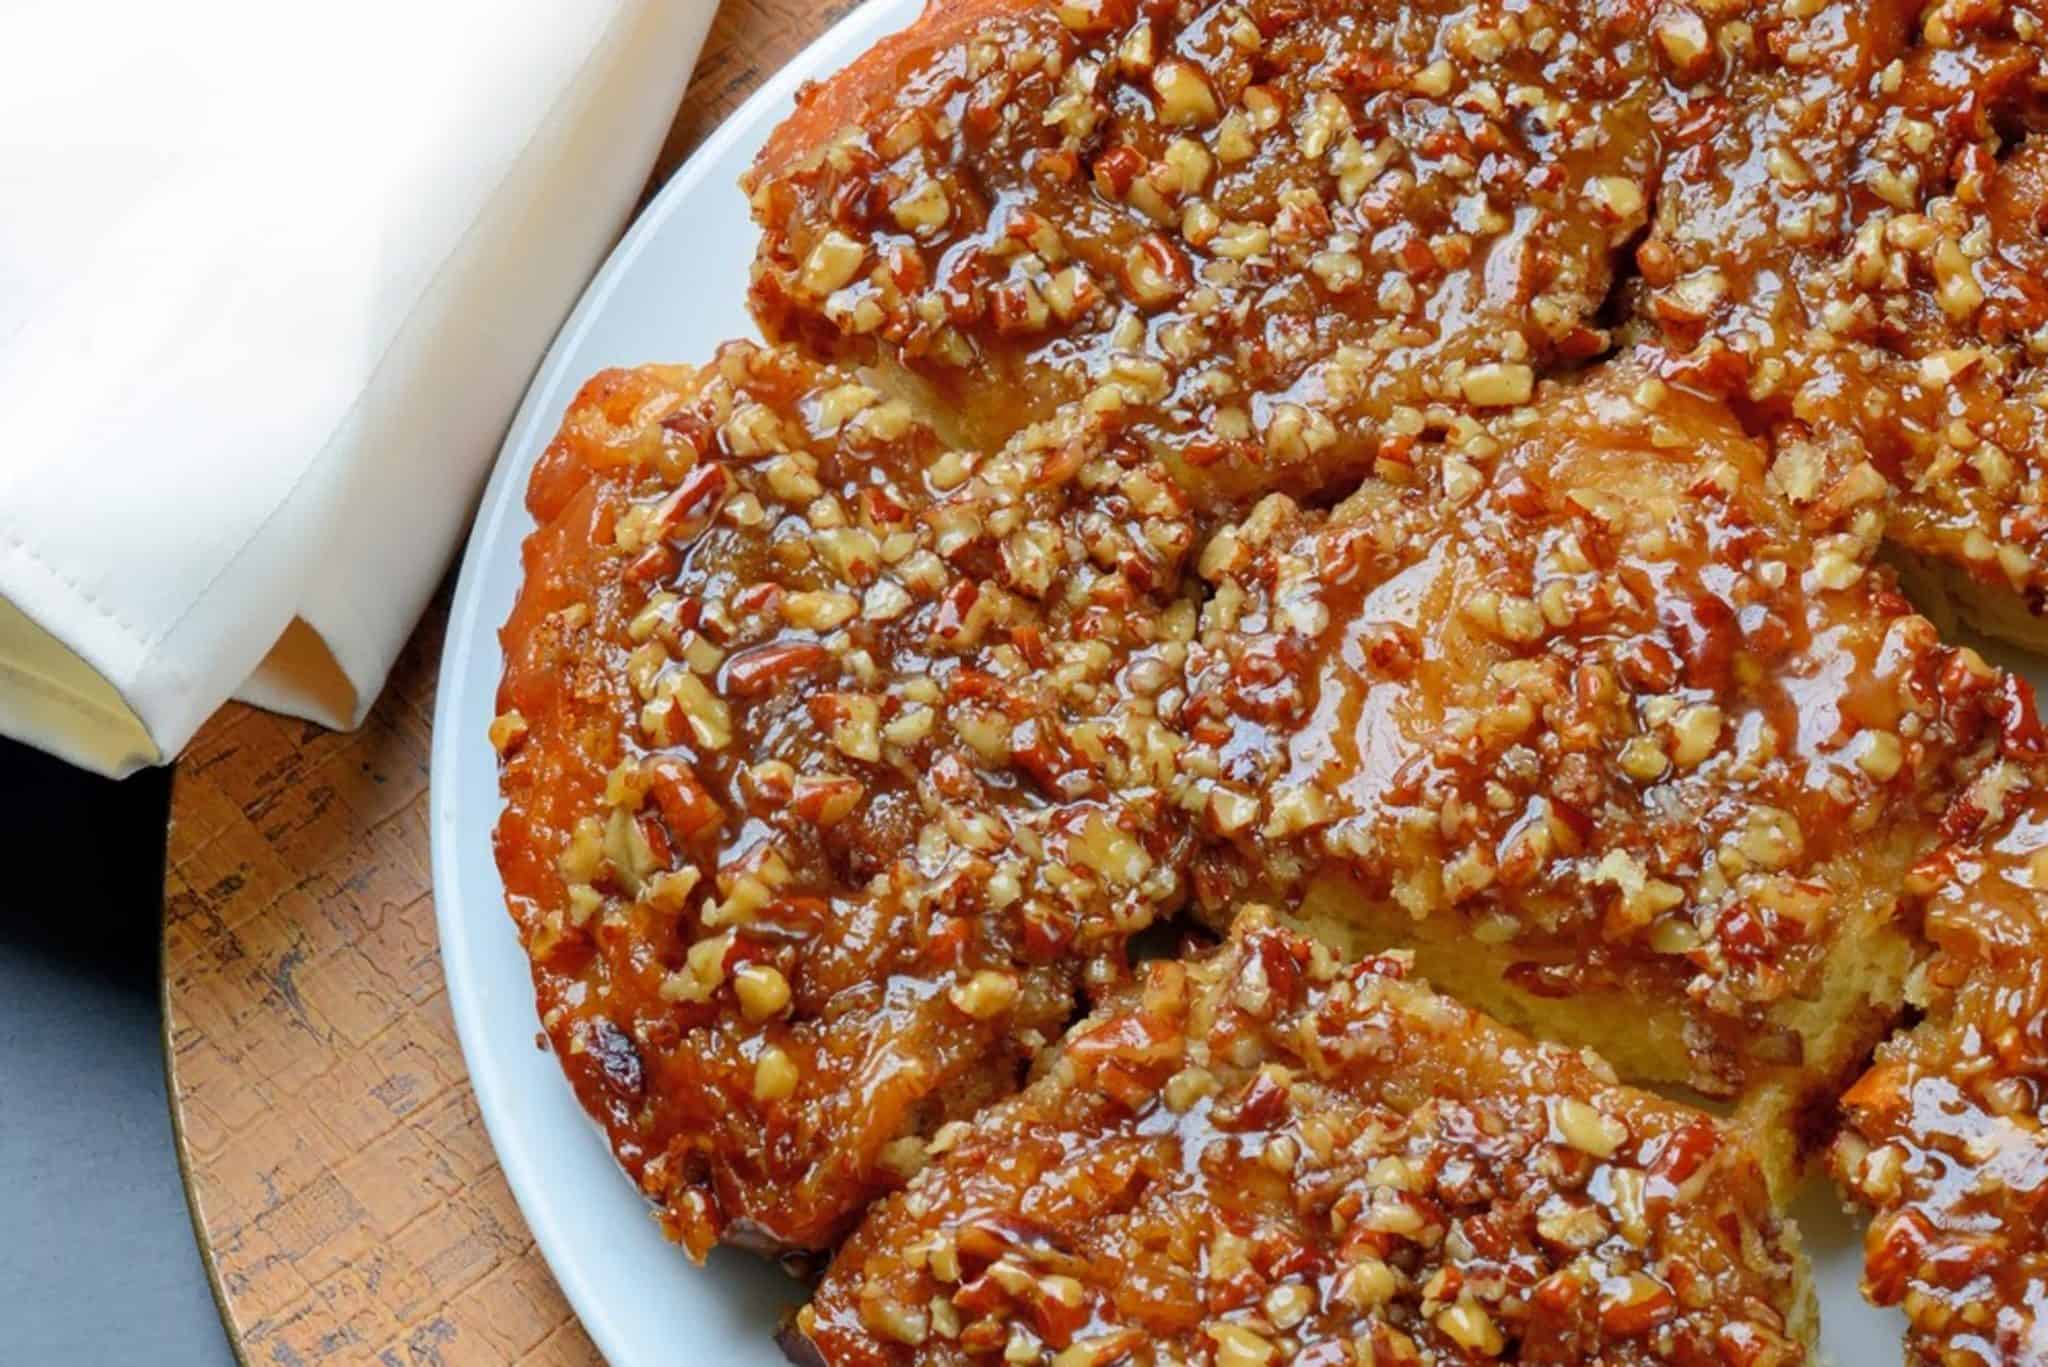 Pecan Sticky Buns are the best hot sticky bun recipe out there, made just the way grandma on the farm made them with a caramel pecan sauce. #stickybuns #stickybunrecipe www.savoryexperiments.com